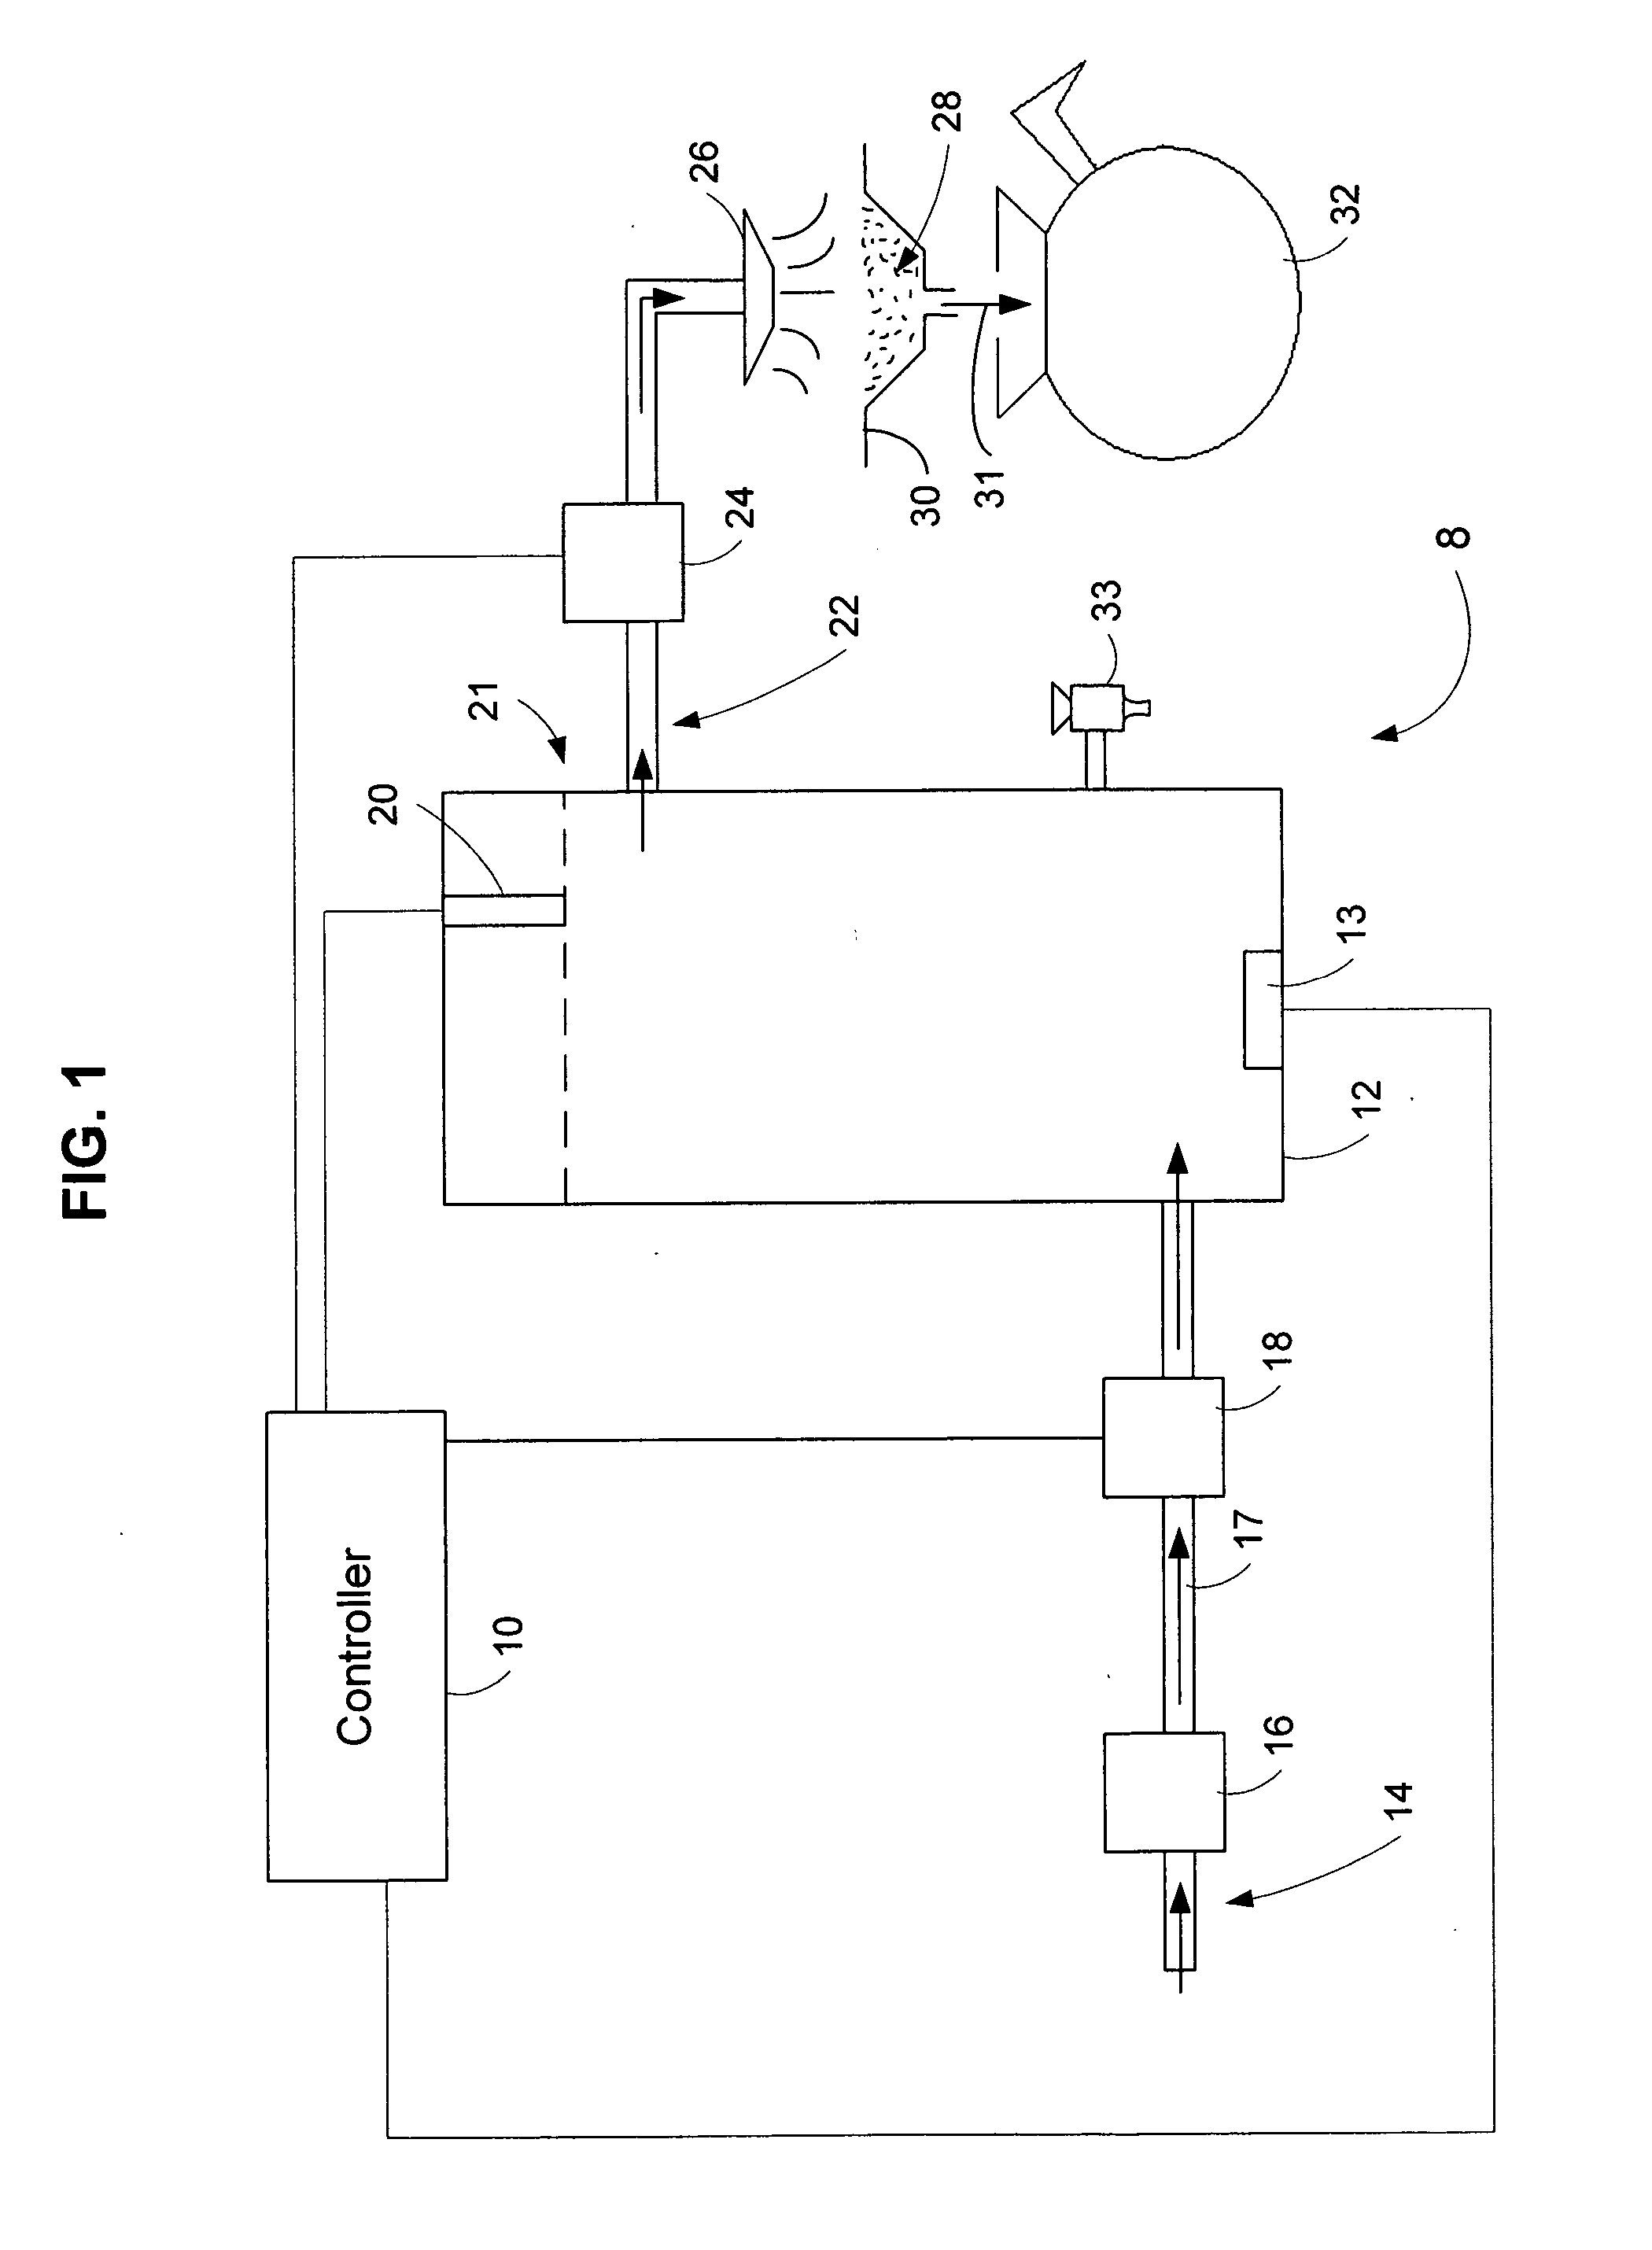 Heated water control system, method, and apparatus